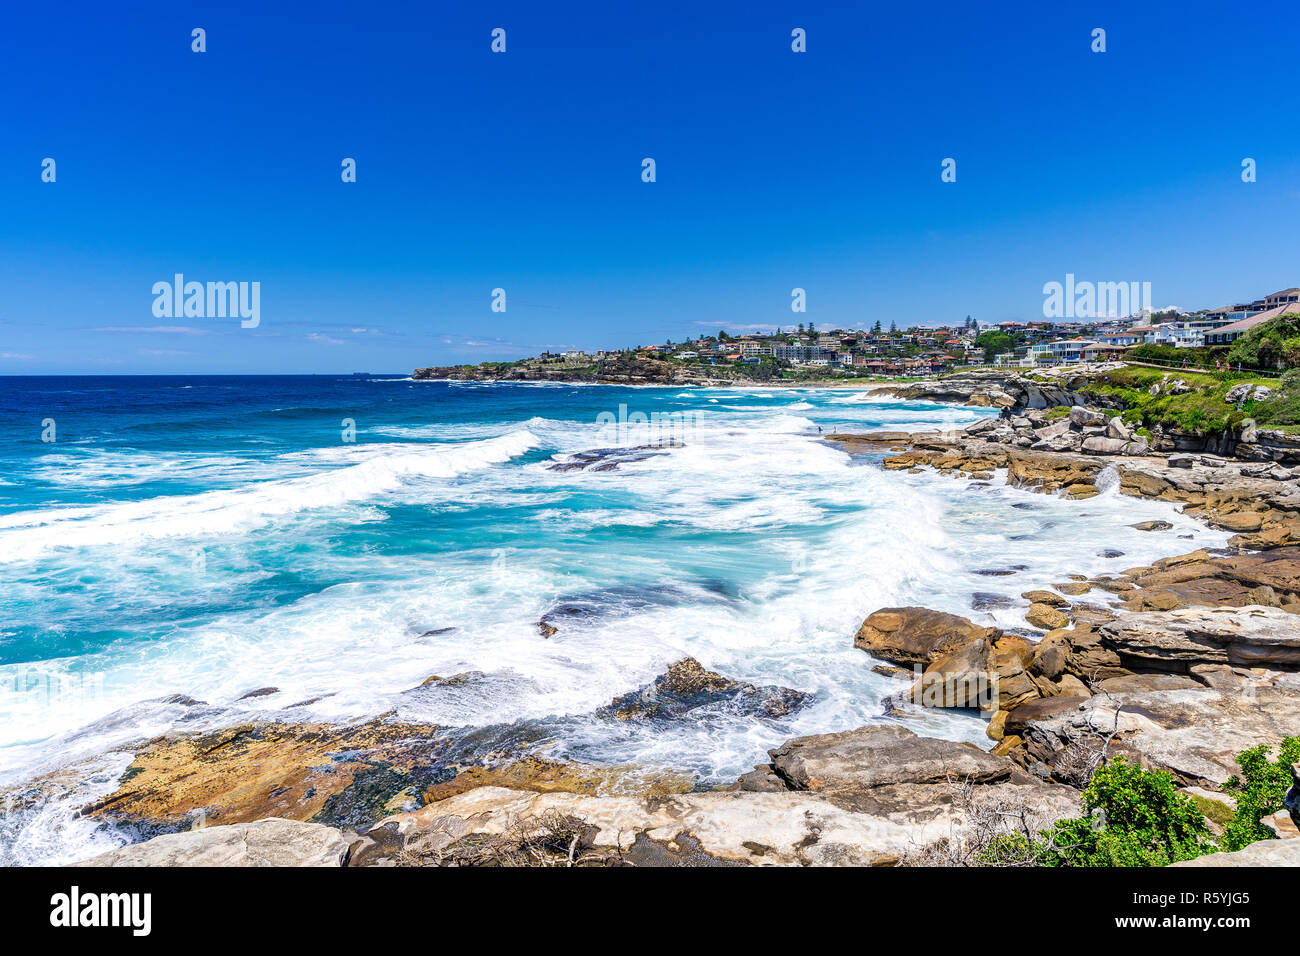 The classic Sydney Coastal walk from Bondi Beach to Coogee Beach is a favourite among locals and tourists. Stock Photo